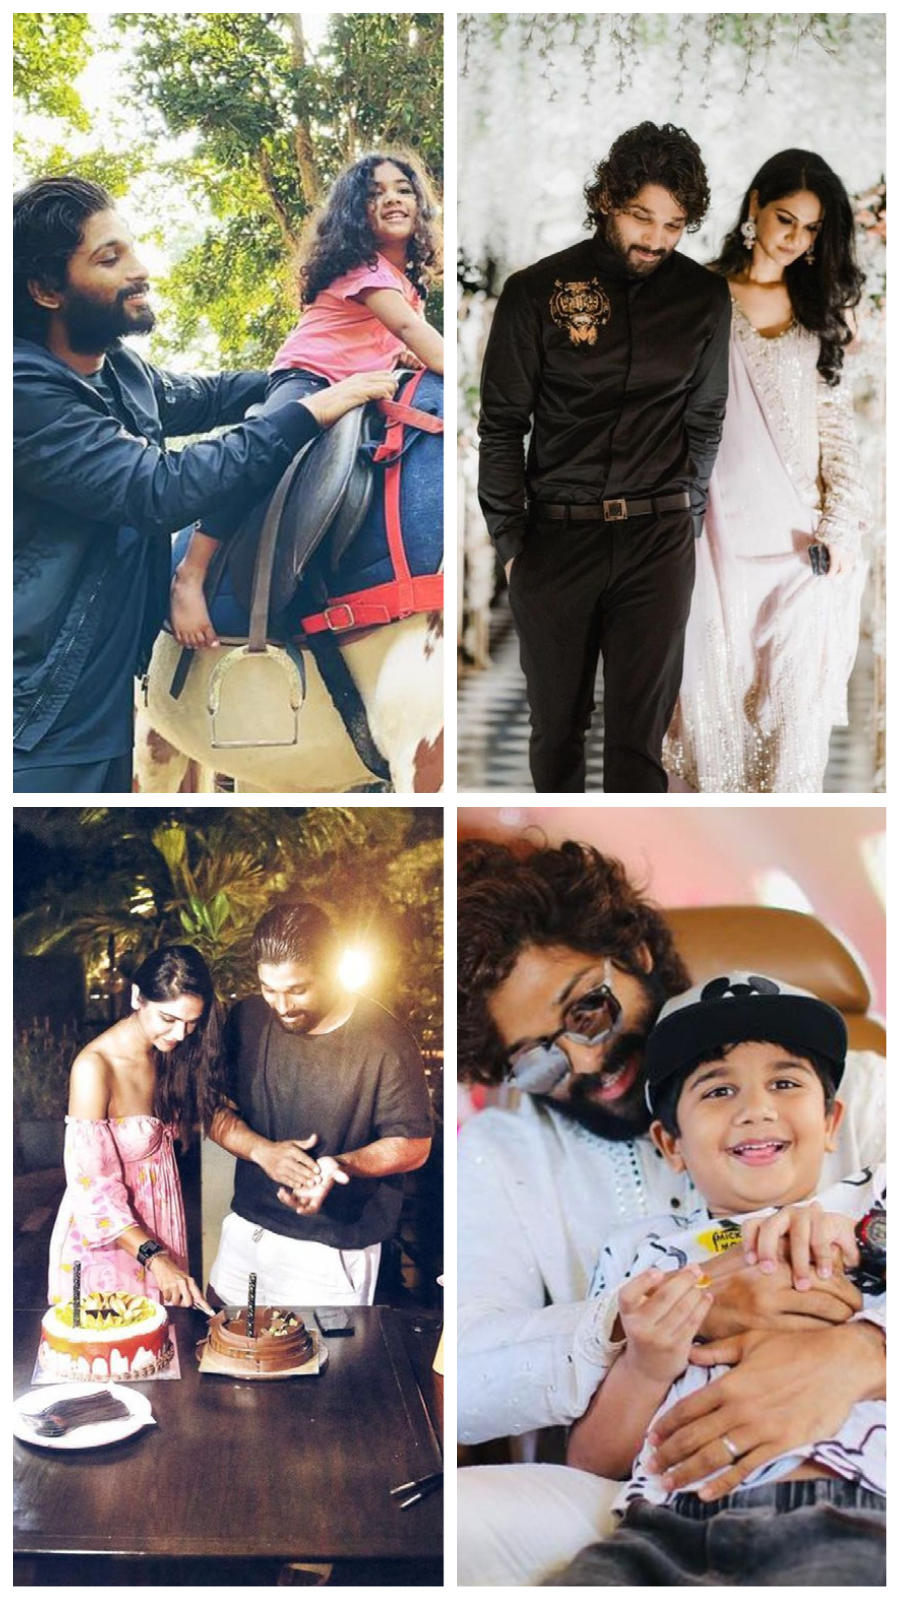 Allu Arjun's beautiful moments with family | Times of India